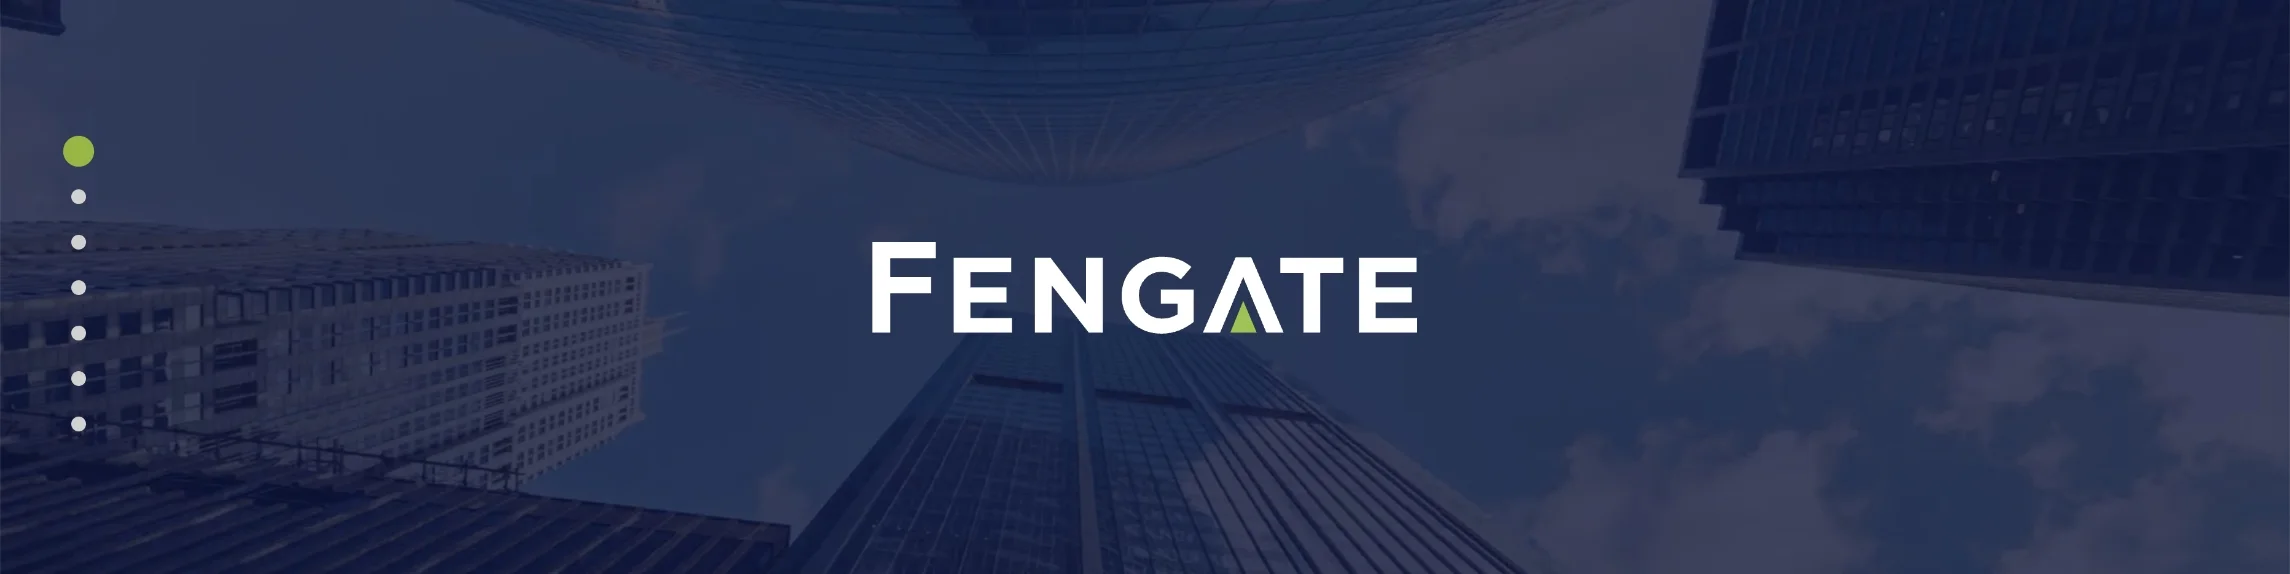 Fengate Banner